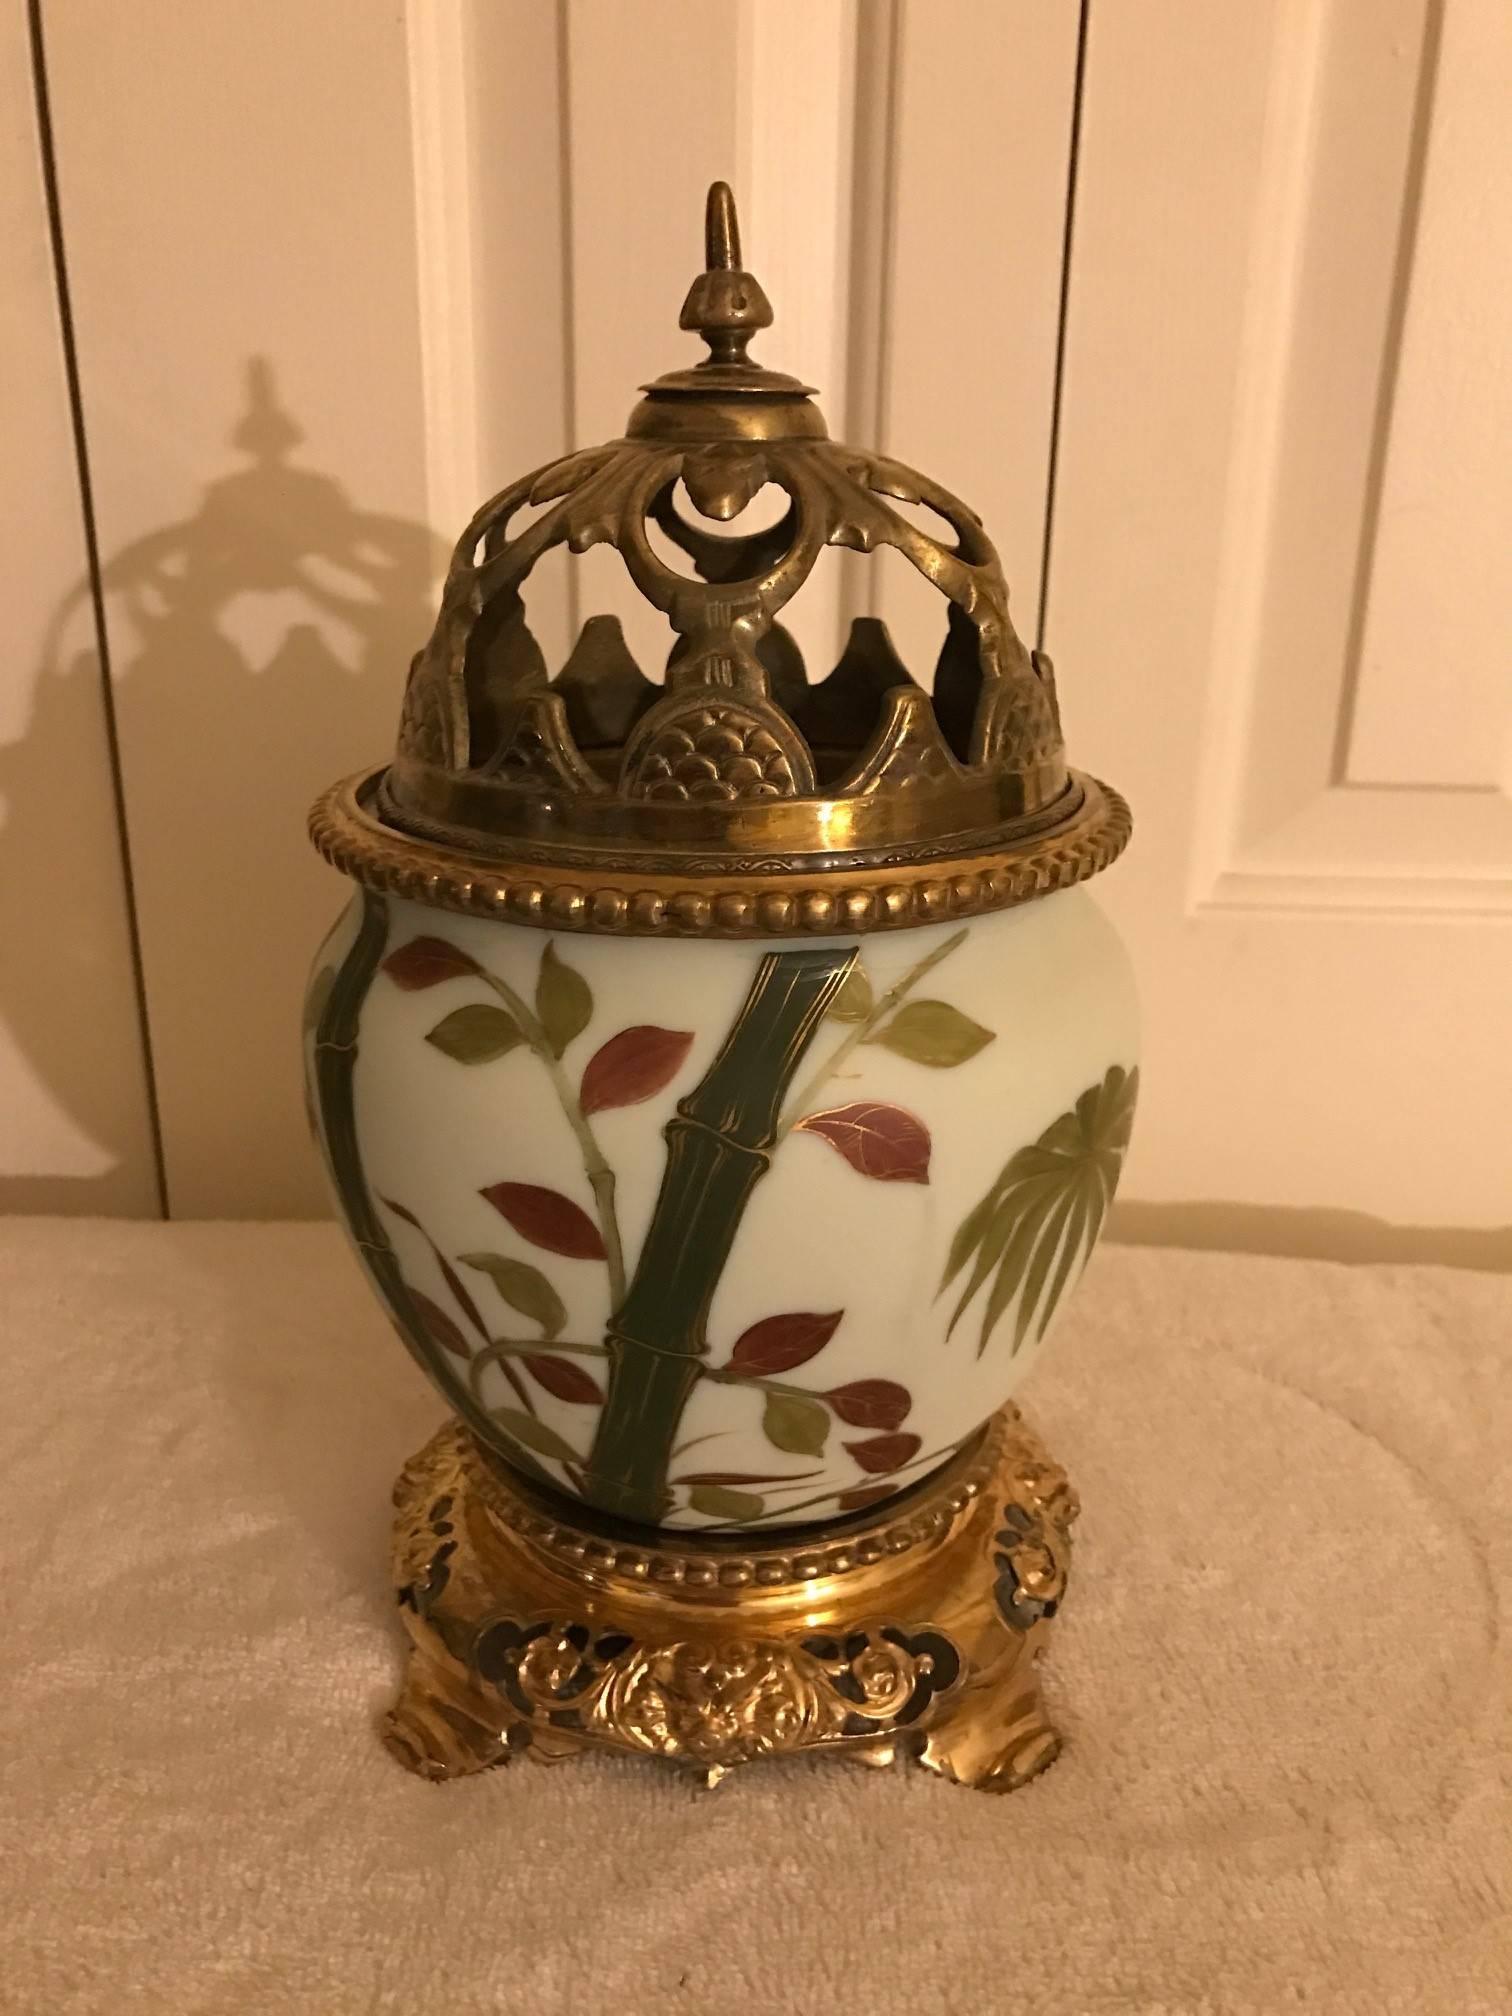 A hand-painted porcelain urn with pierced cast brass lid. The tropical motif pattern is all hand decorated with gilt brass base. The quality and detail of the porcelain is in the manner of Royal Worcester. This would be a beautiful jardinière if